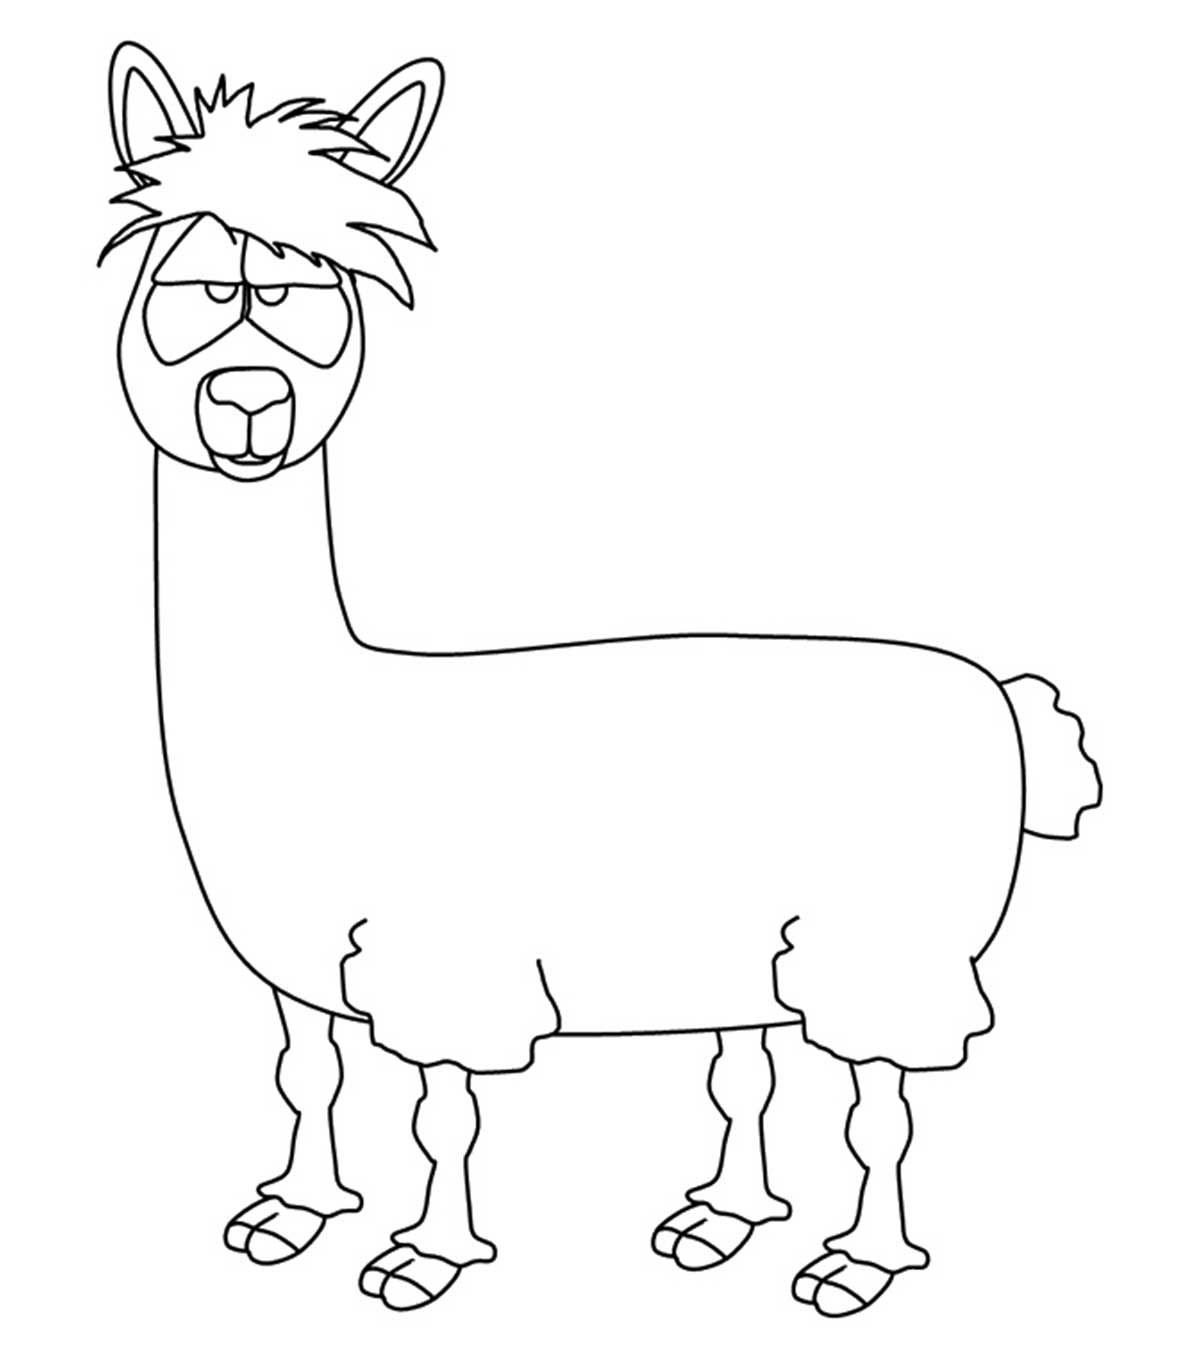 10 Cute Llama Coloring Pages For Toddlers